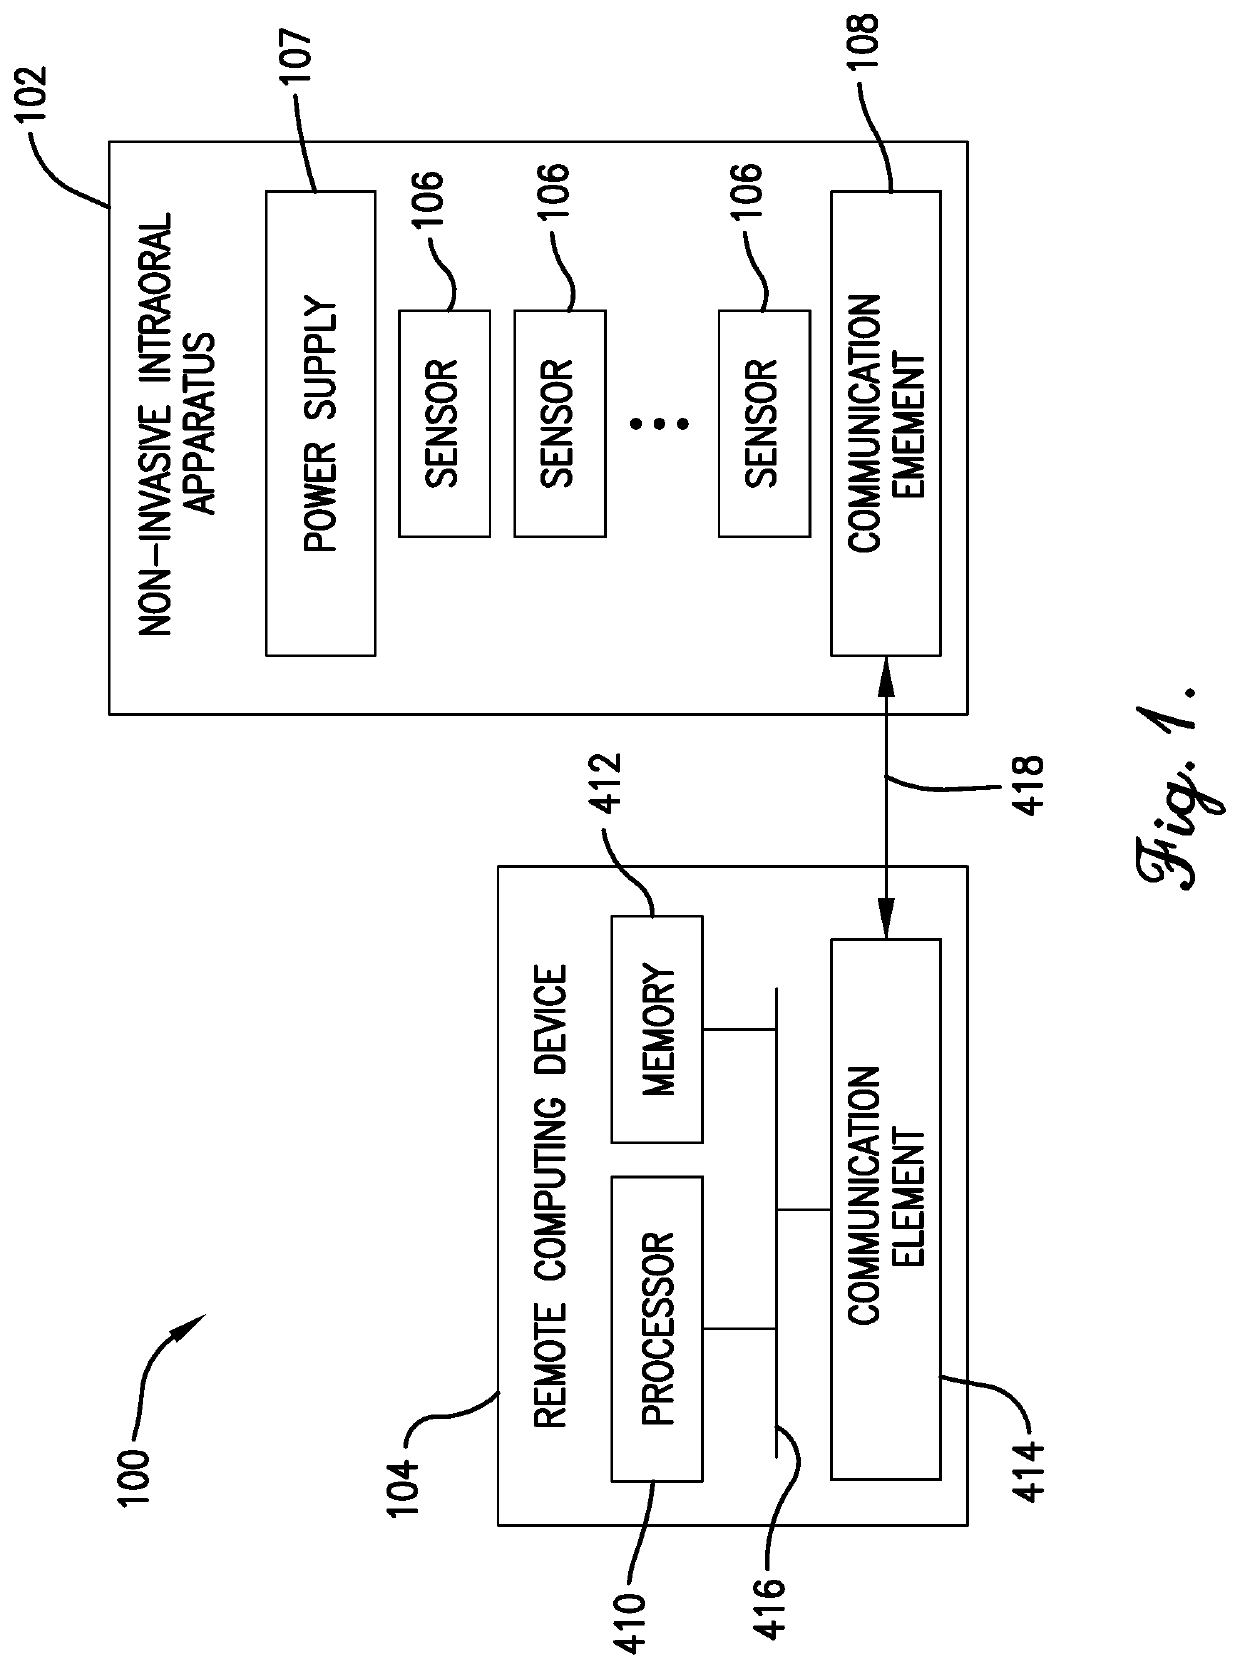 Systems and methods for evaluating oral function